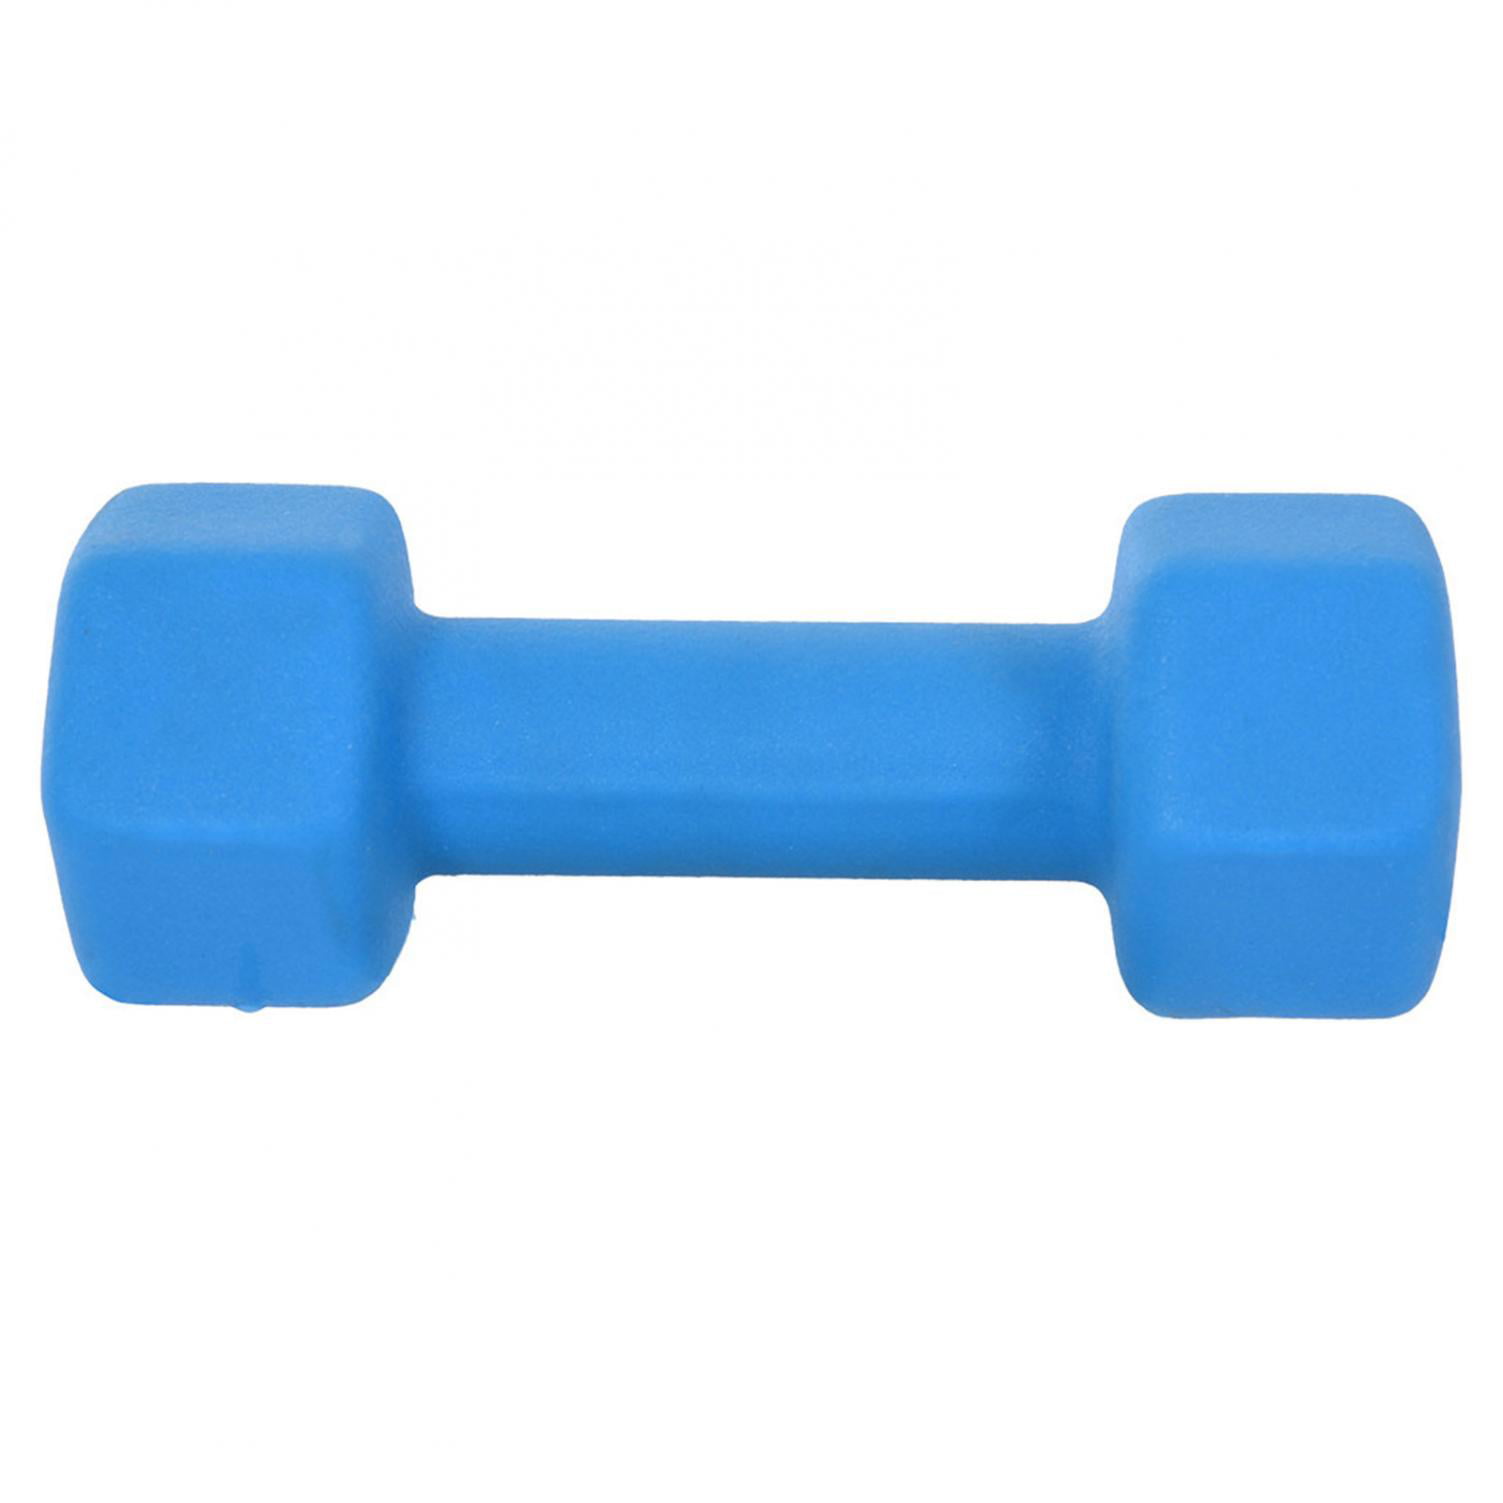 Details about   Barbell Set Of 2 All-Purpose Dumbbells In Pair Neoprene Coated Dumbbell Weight 